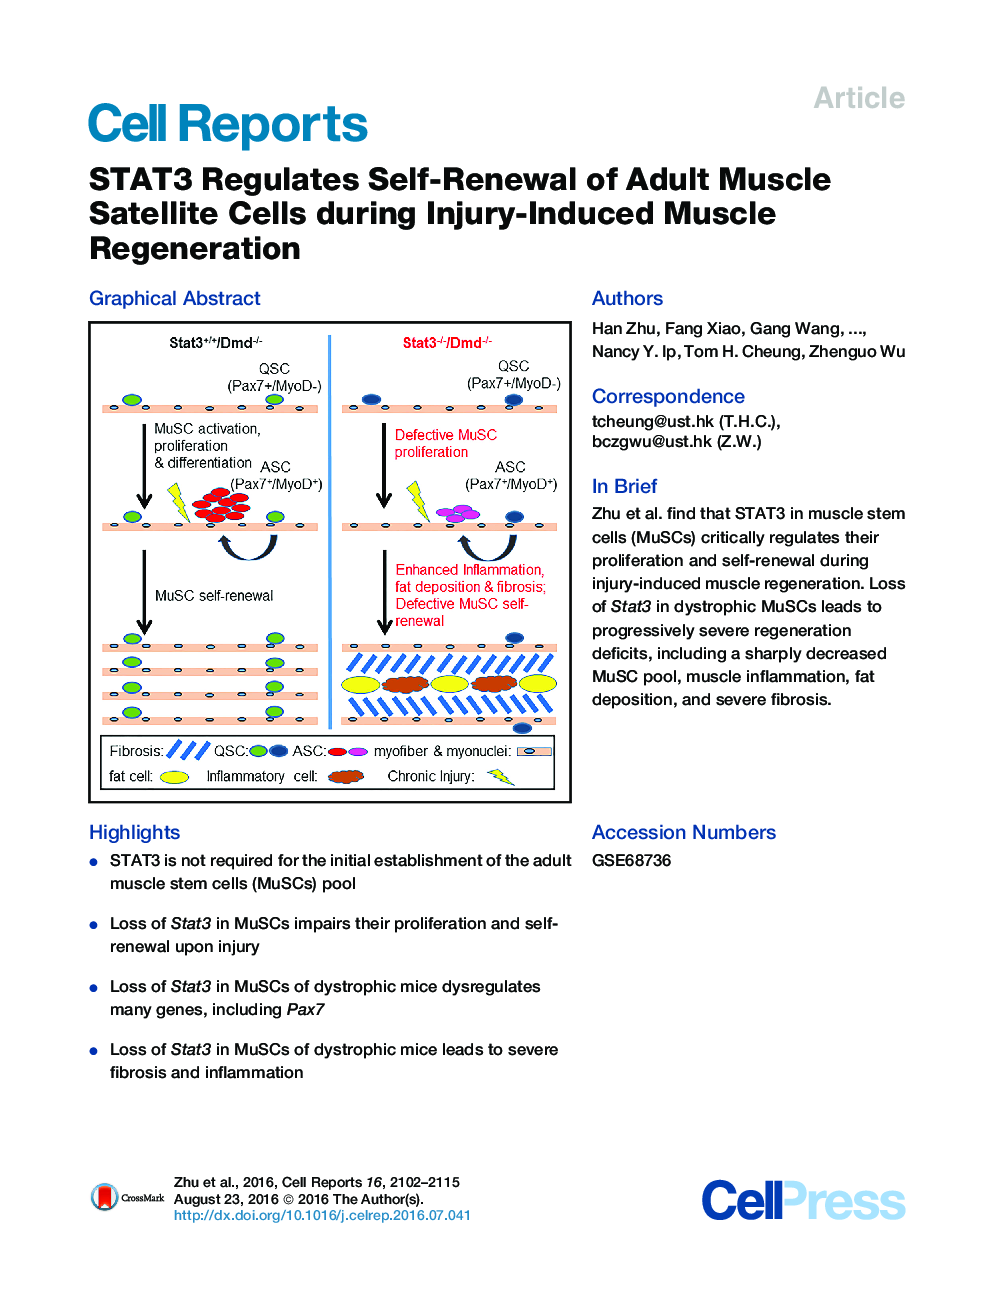 STAT3 Regulates Self-Renewal of Adult Muscle Satellite Cells during Injury-Induced Muscle Regeneration